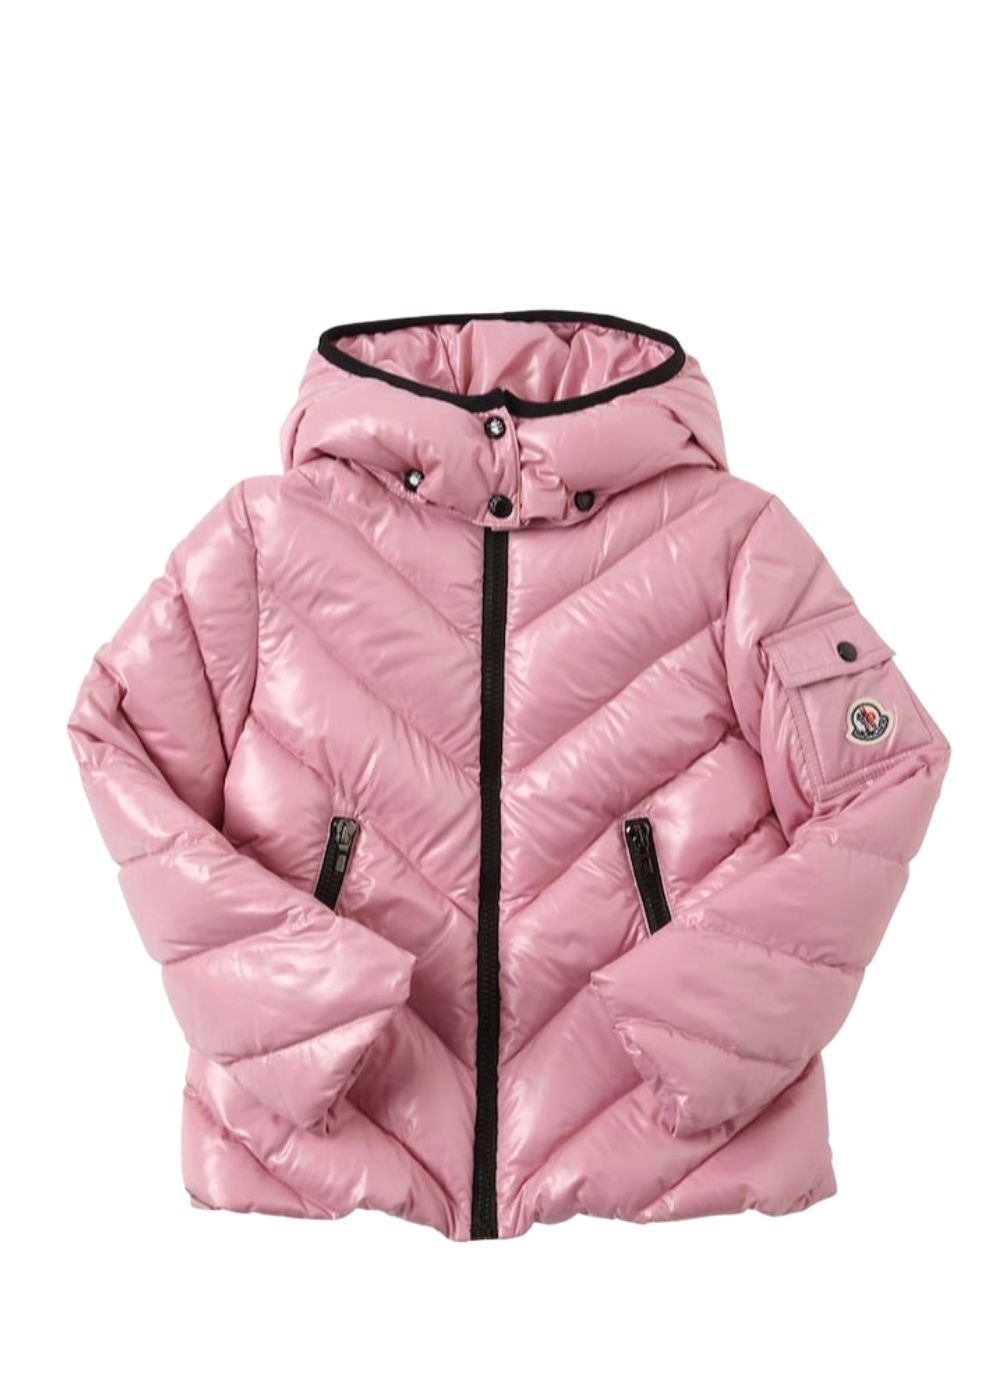 Featured image for “MONCLER BROUEL”